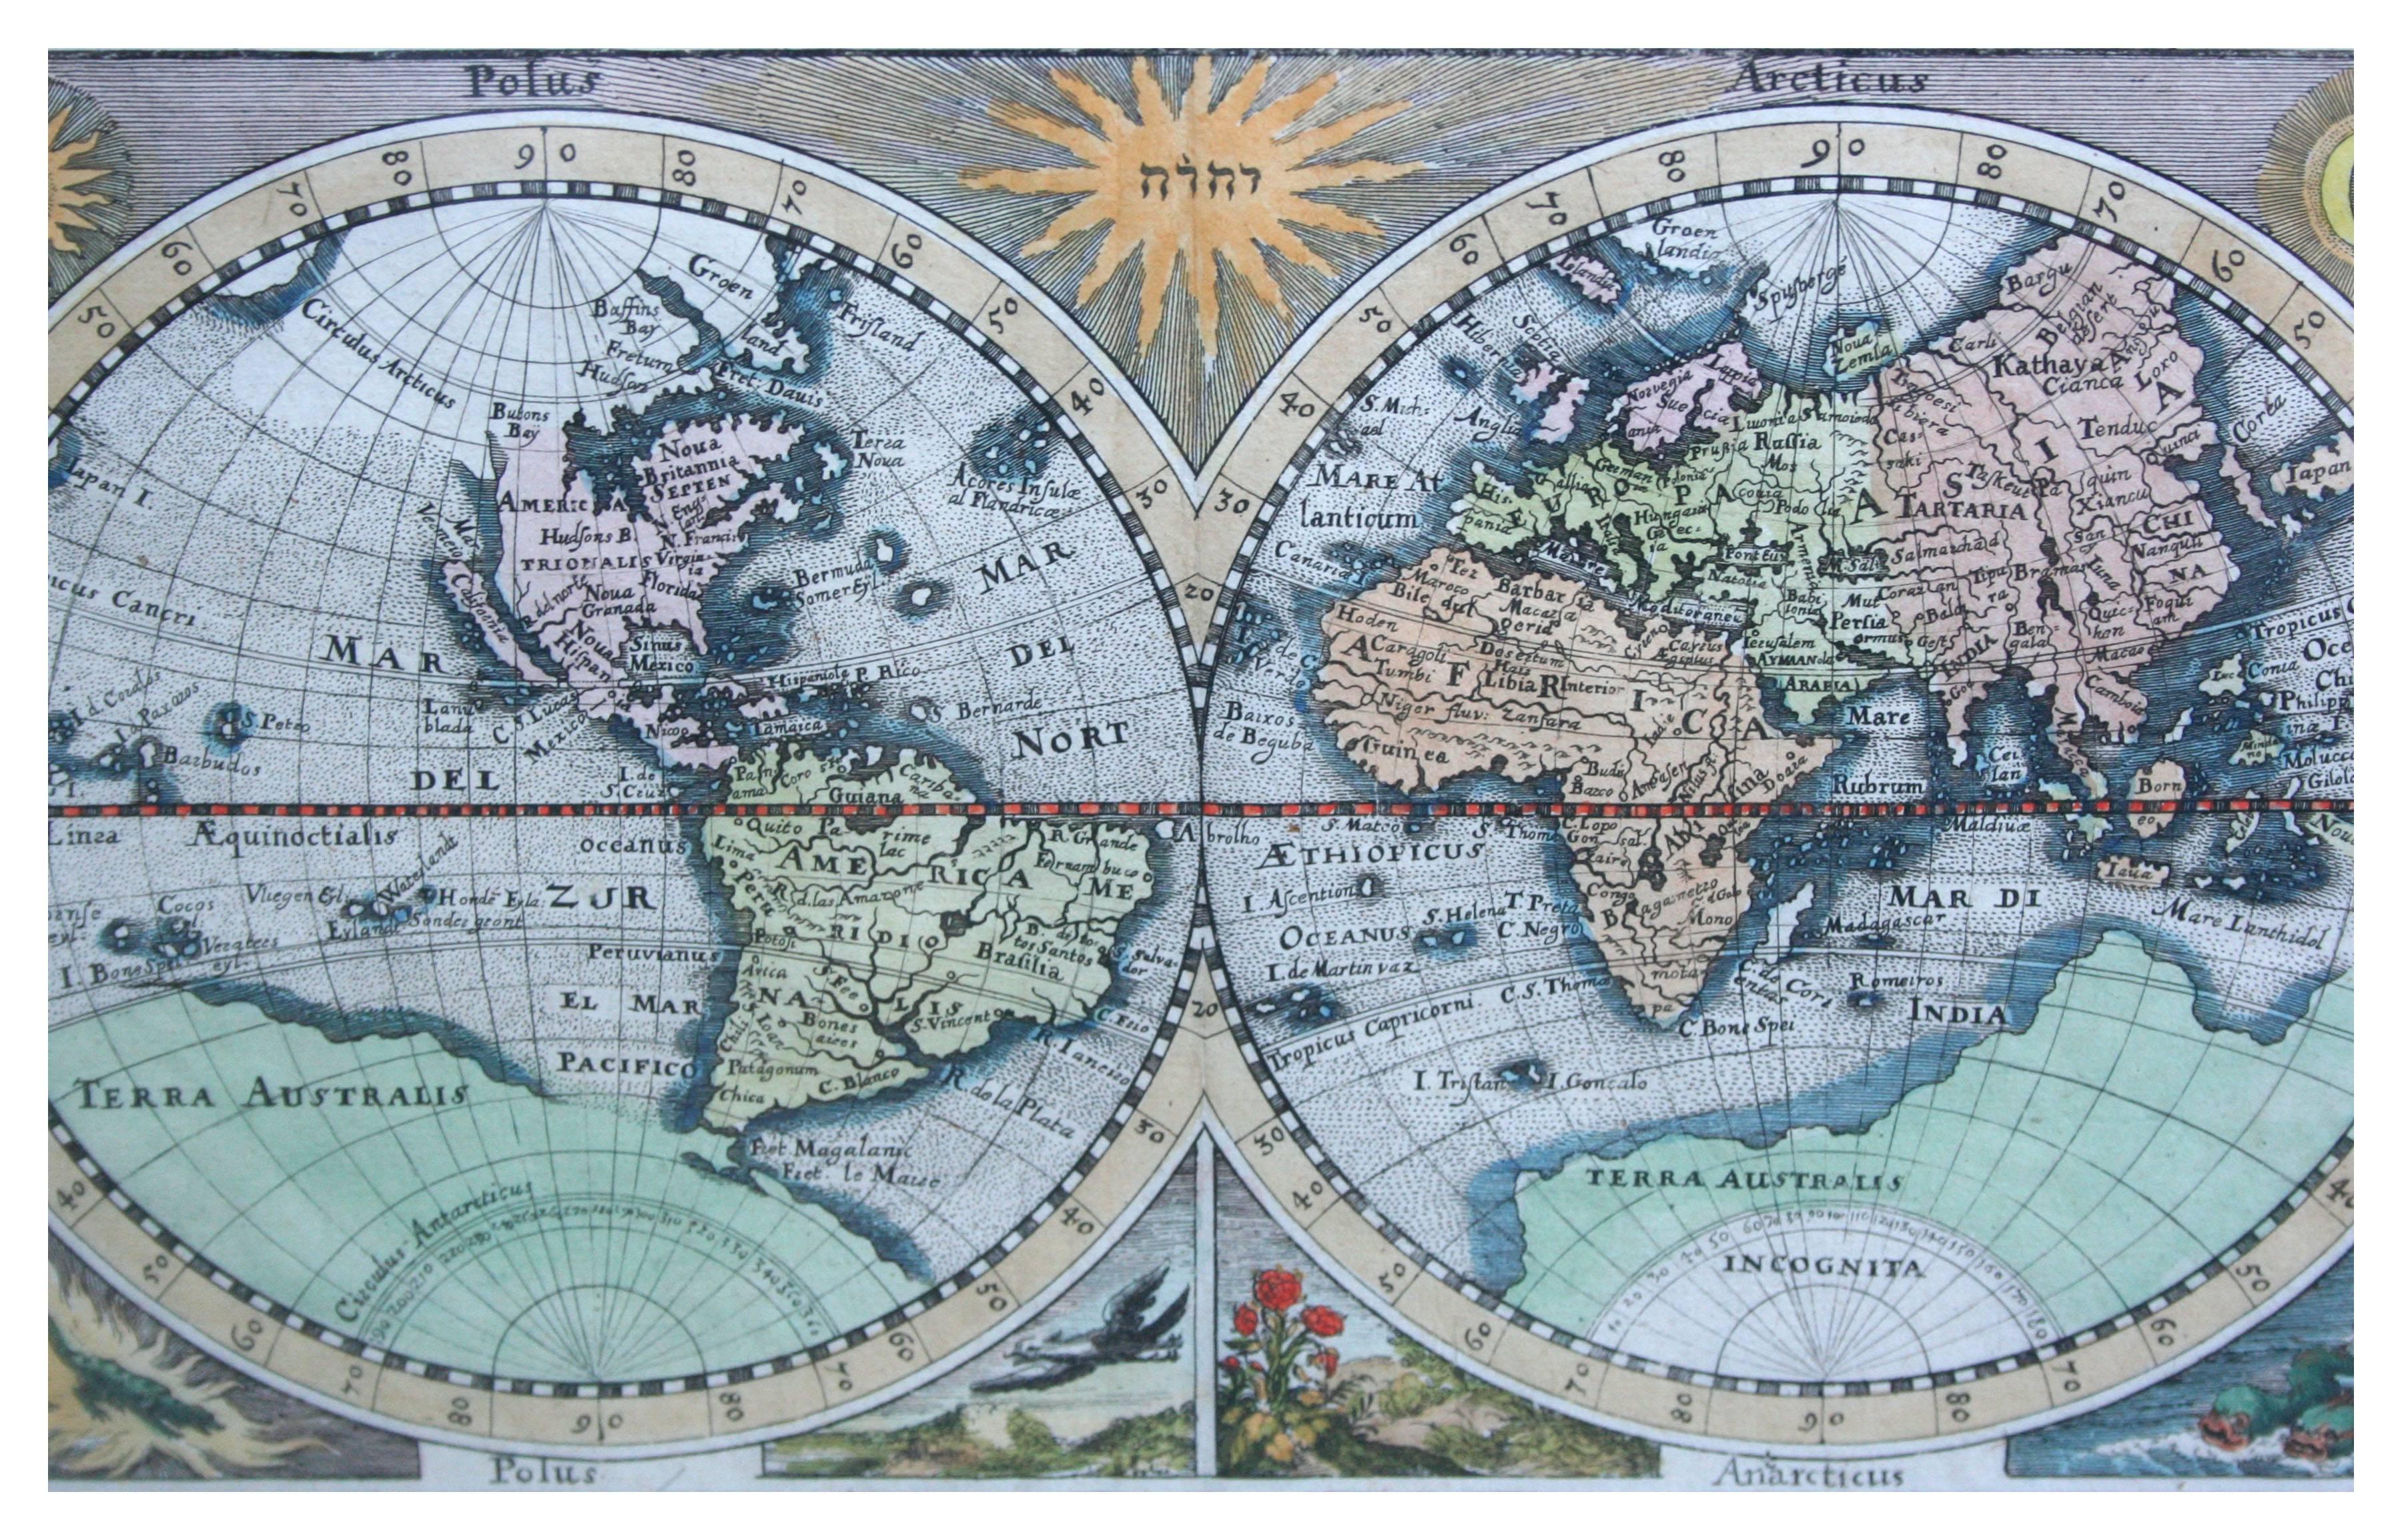 Hand-colored twin hemisphere map of the world by Matthaus Merian. From Gottfried's 